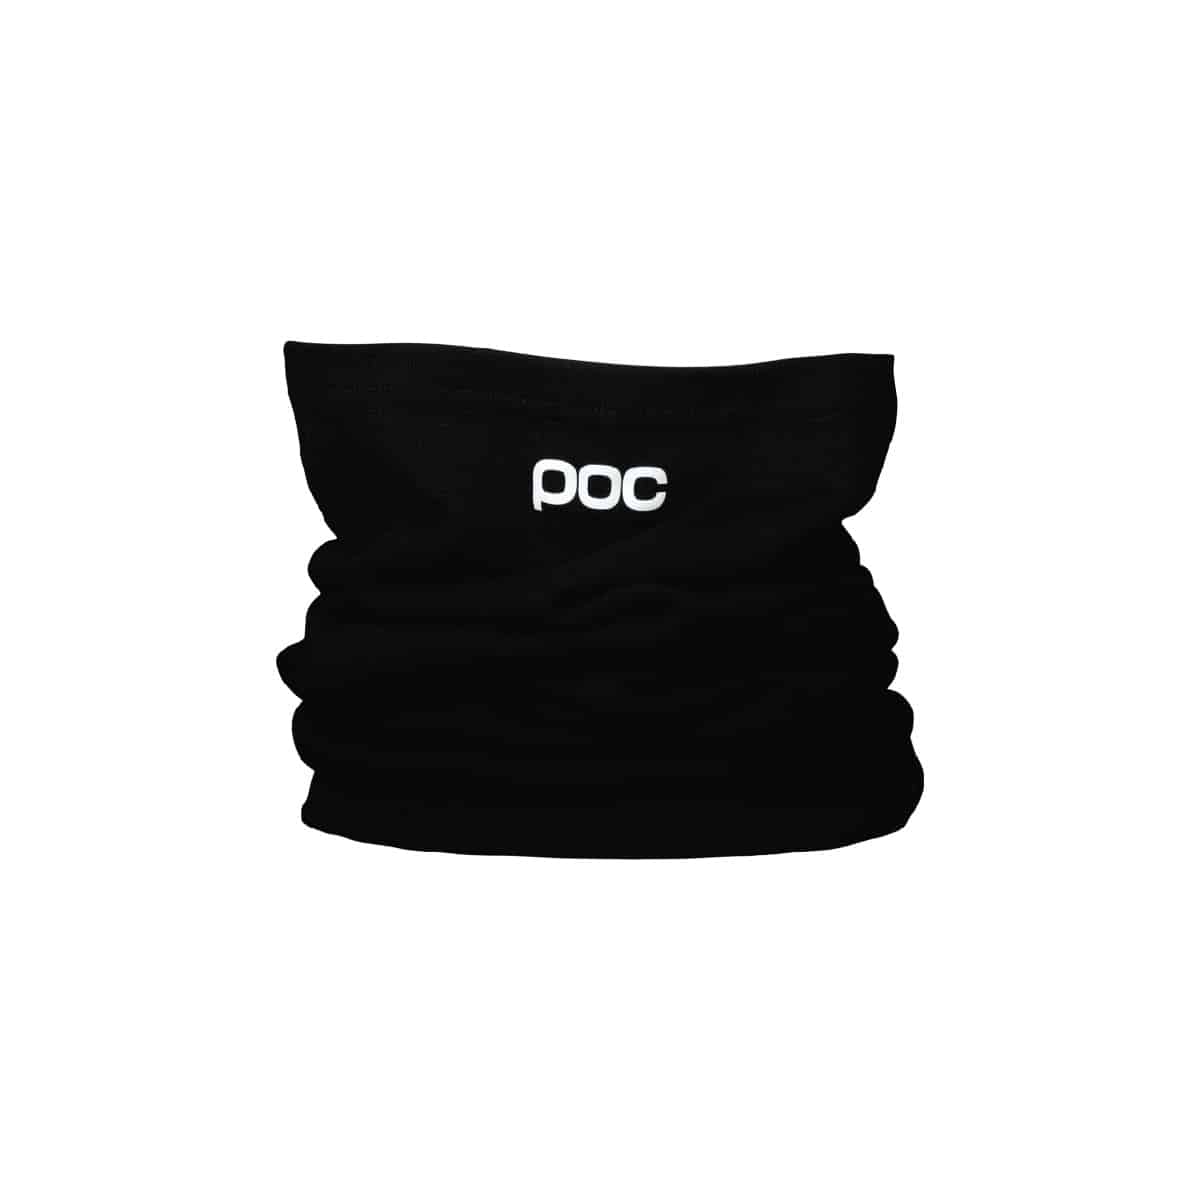 Poc Thermal Neck Warmer scrunched